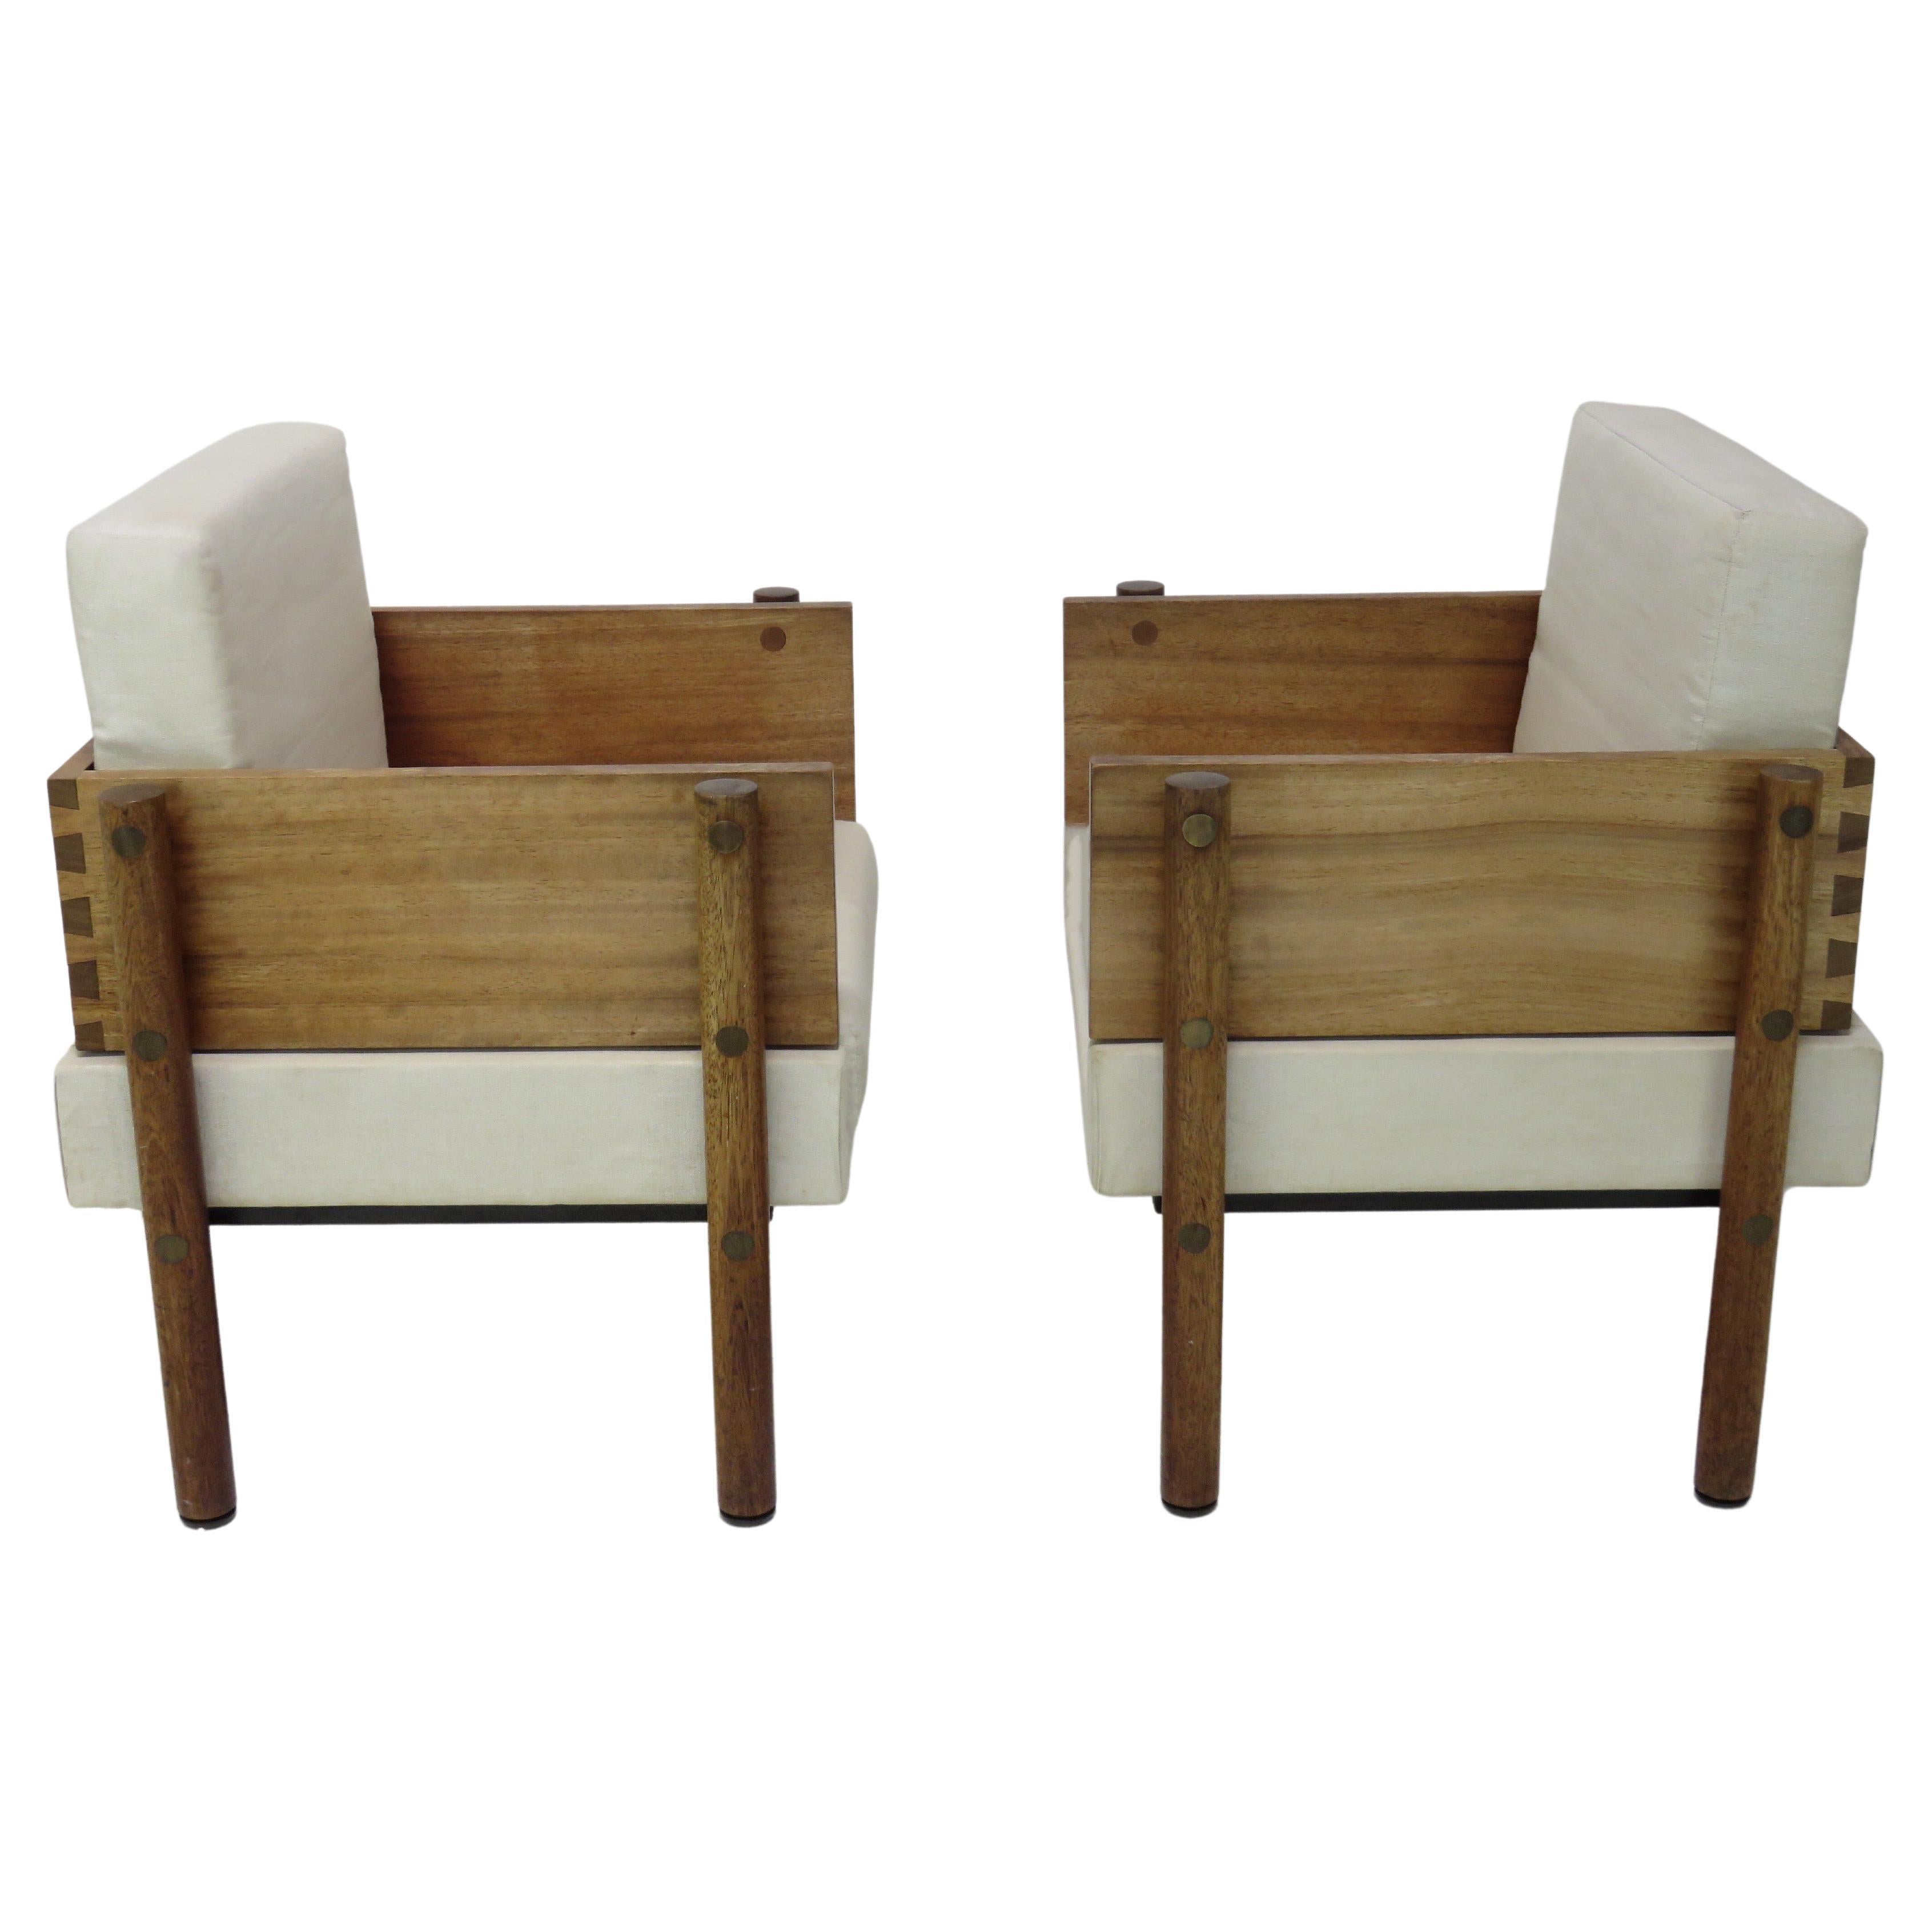 Architect / Designer pair of lounge chairs are of solid Mahogany, with brass accents. The cushions soften the cubic form seats that sit atop solid round hard wood legs. 